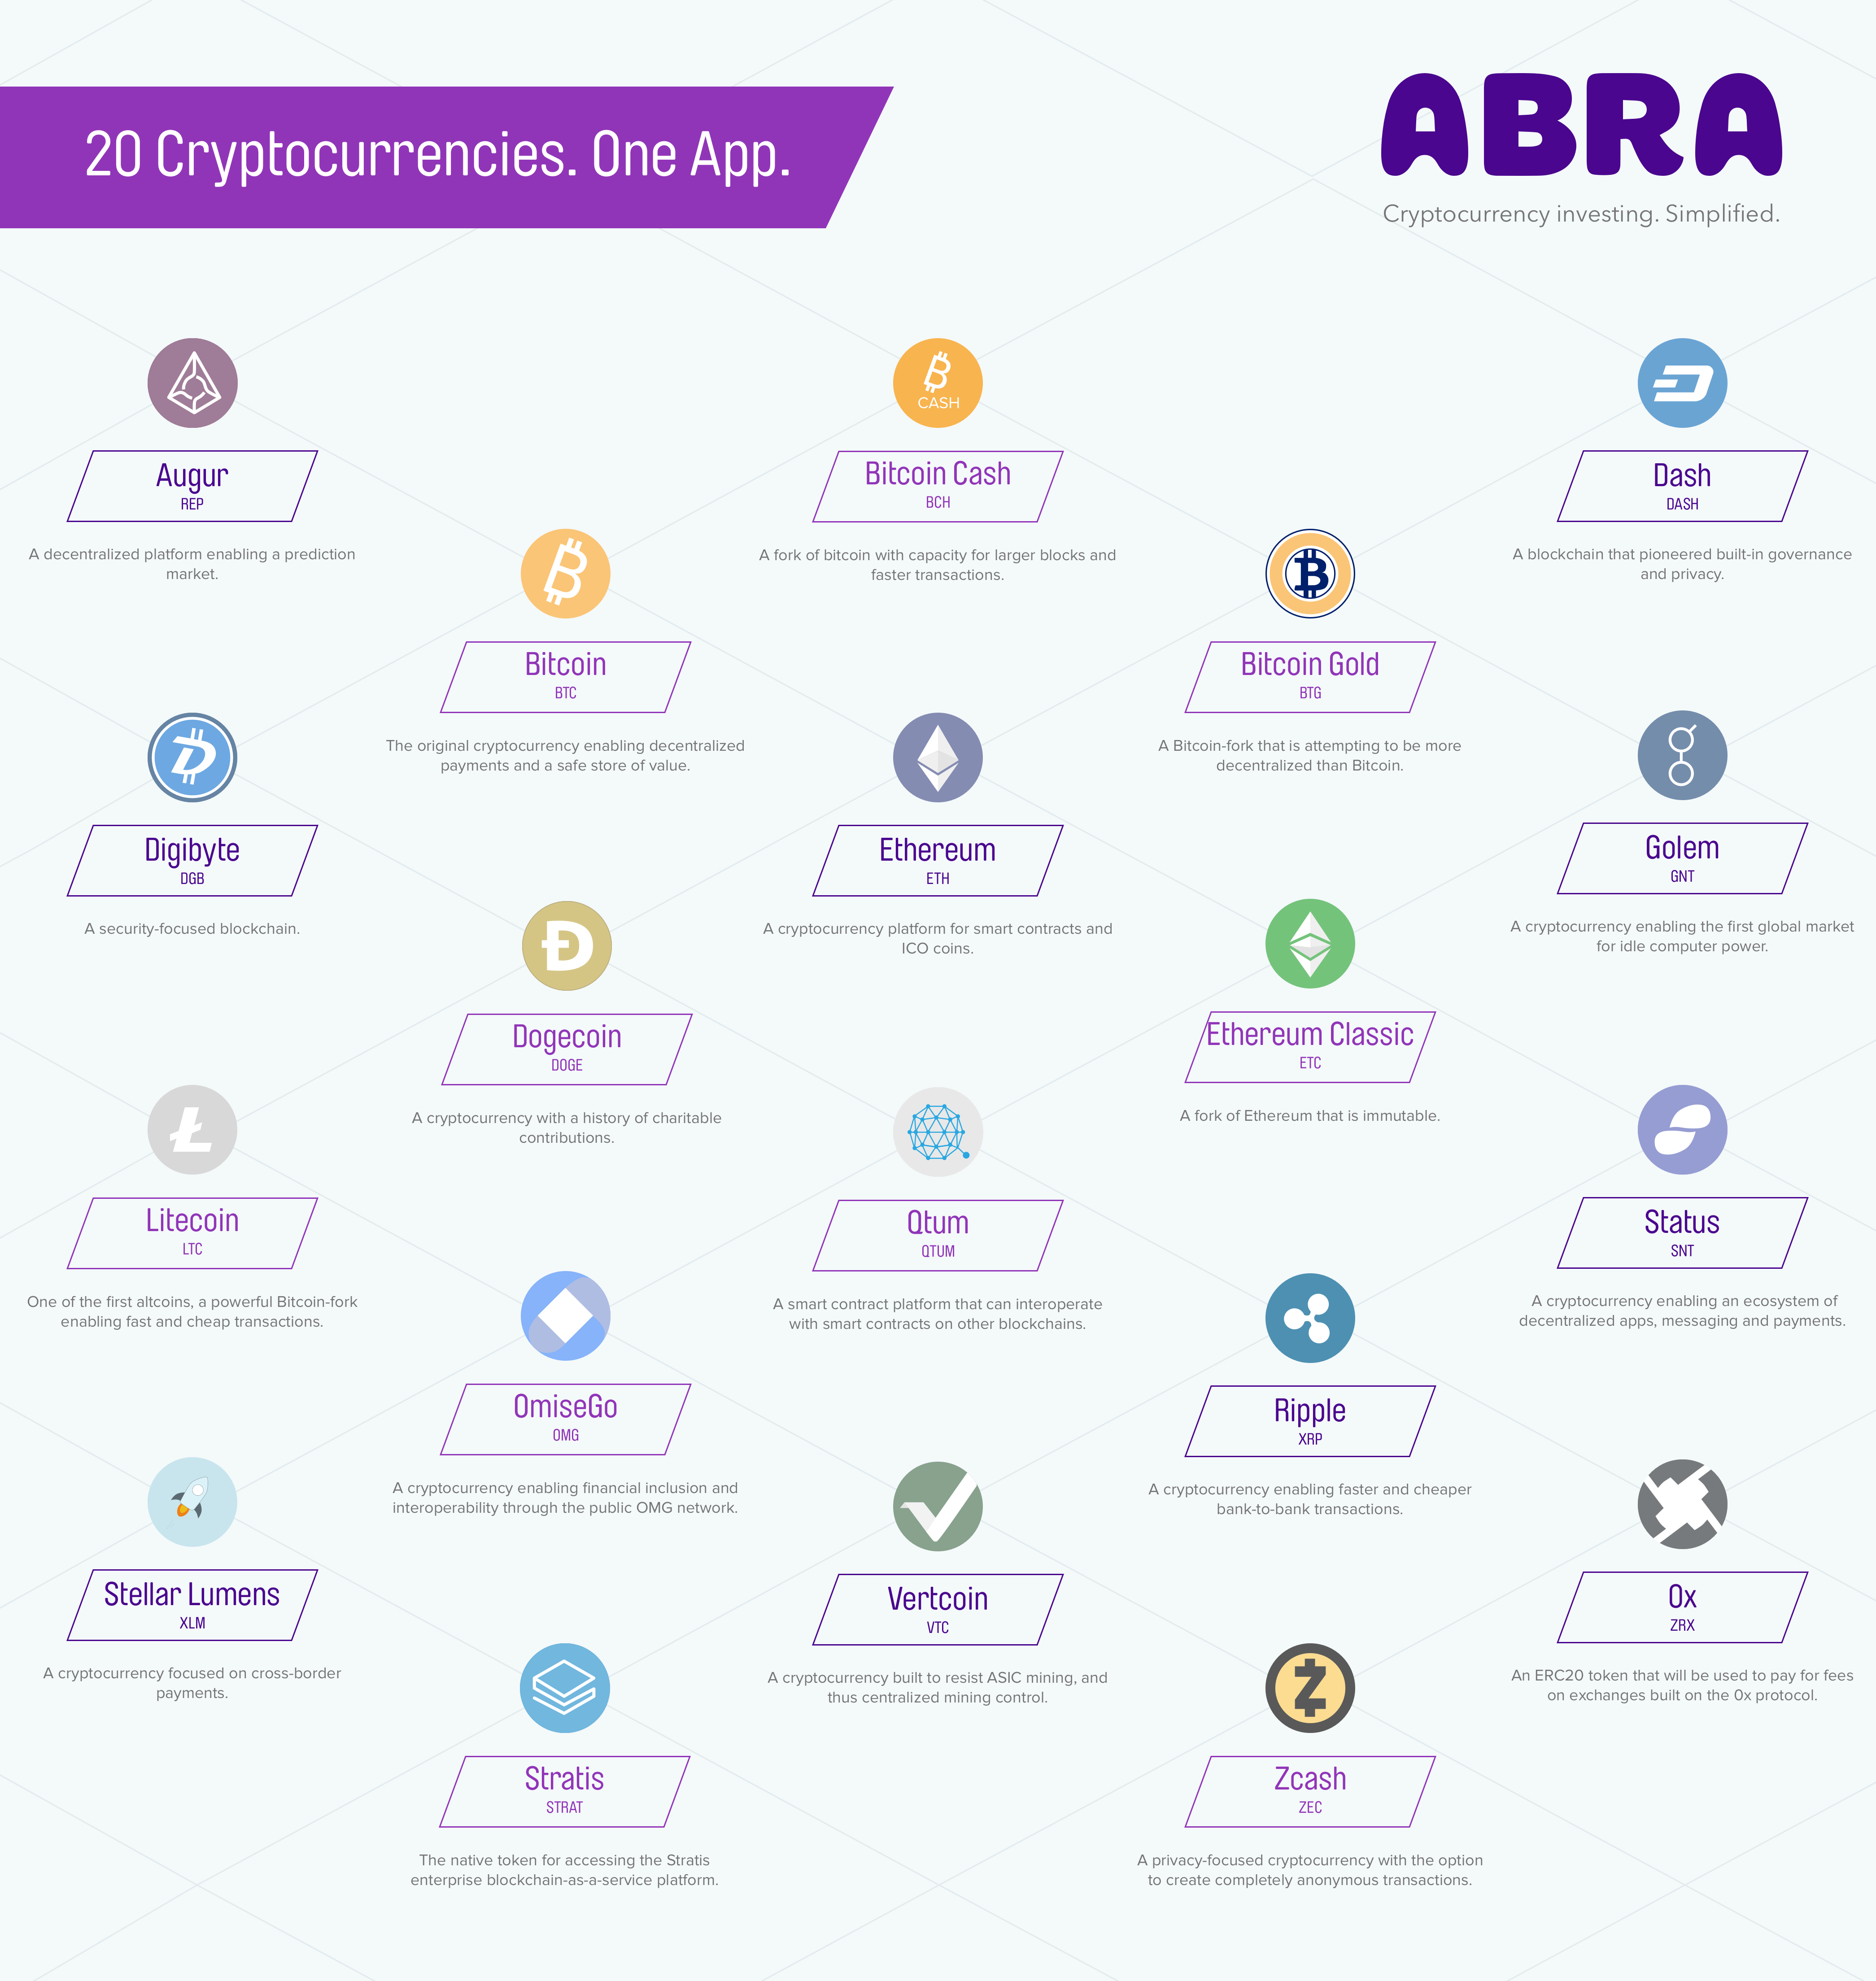 Crypto Lender Abra Has Been Insolvent for Months, State Regulators Say | Video | CoinDesk